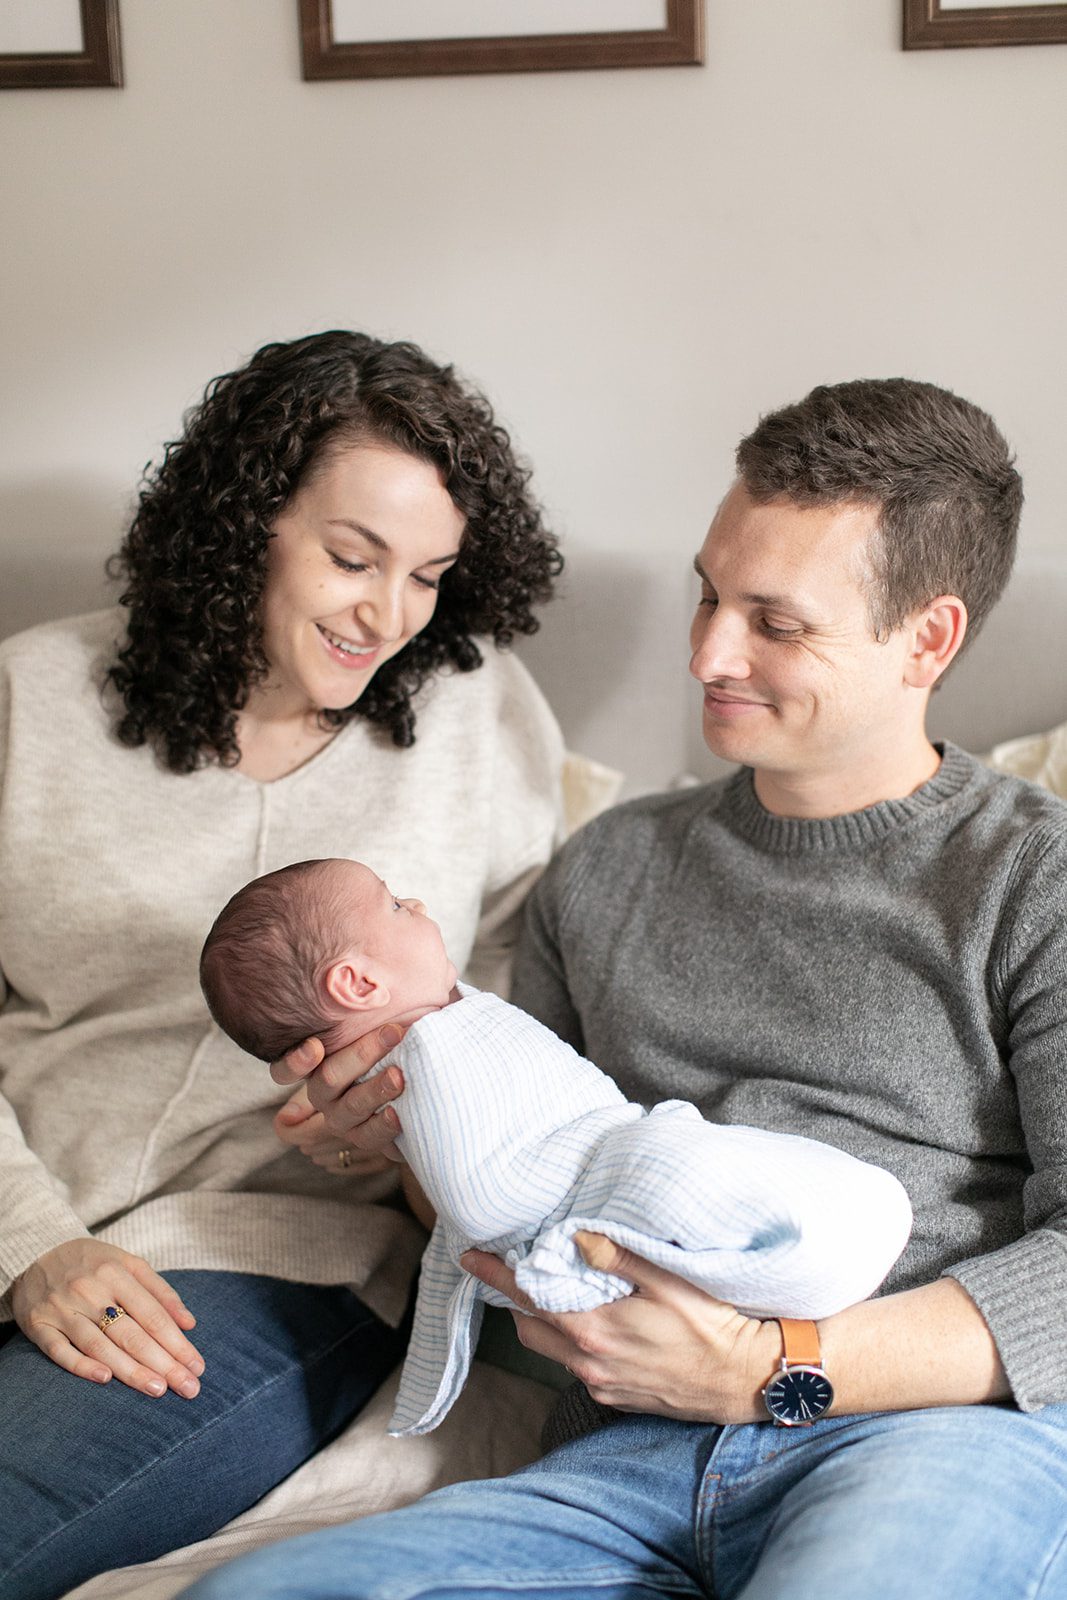 man and woman smile at newborn baby while sitting on couch